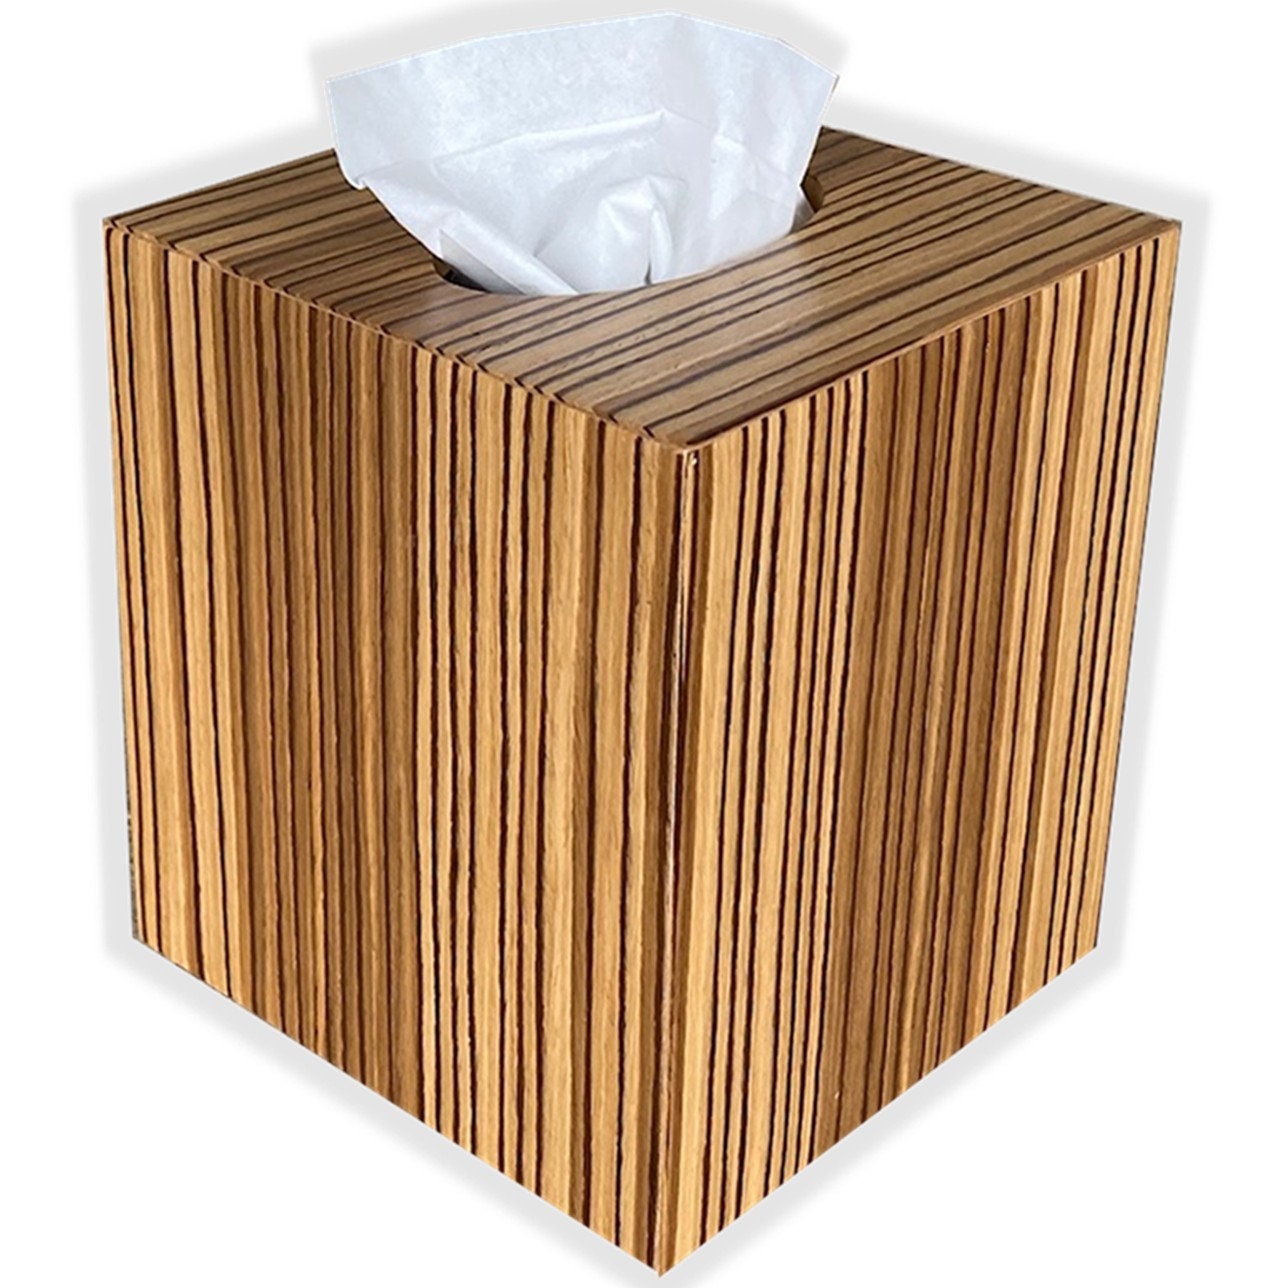 Tissue Box Cover Cube Square Size Boutique in Birdseye Maple Wood Veneer. 